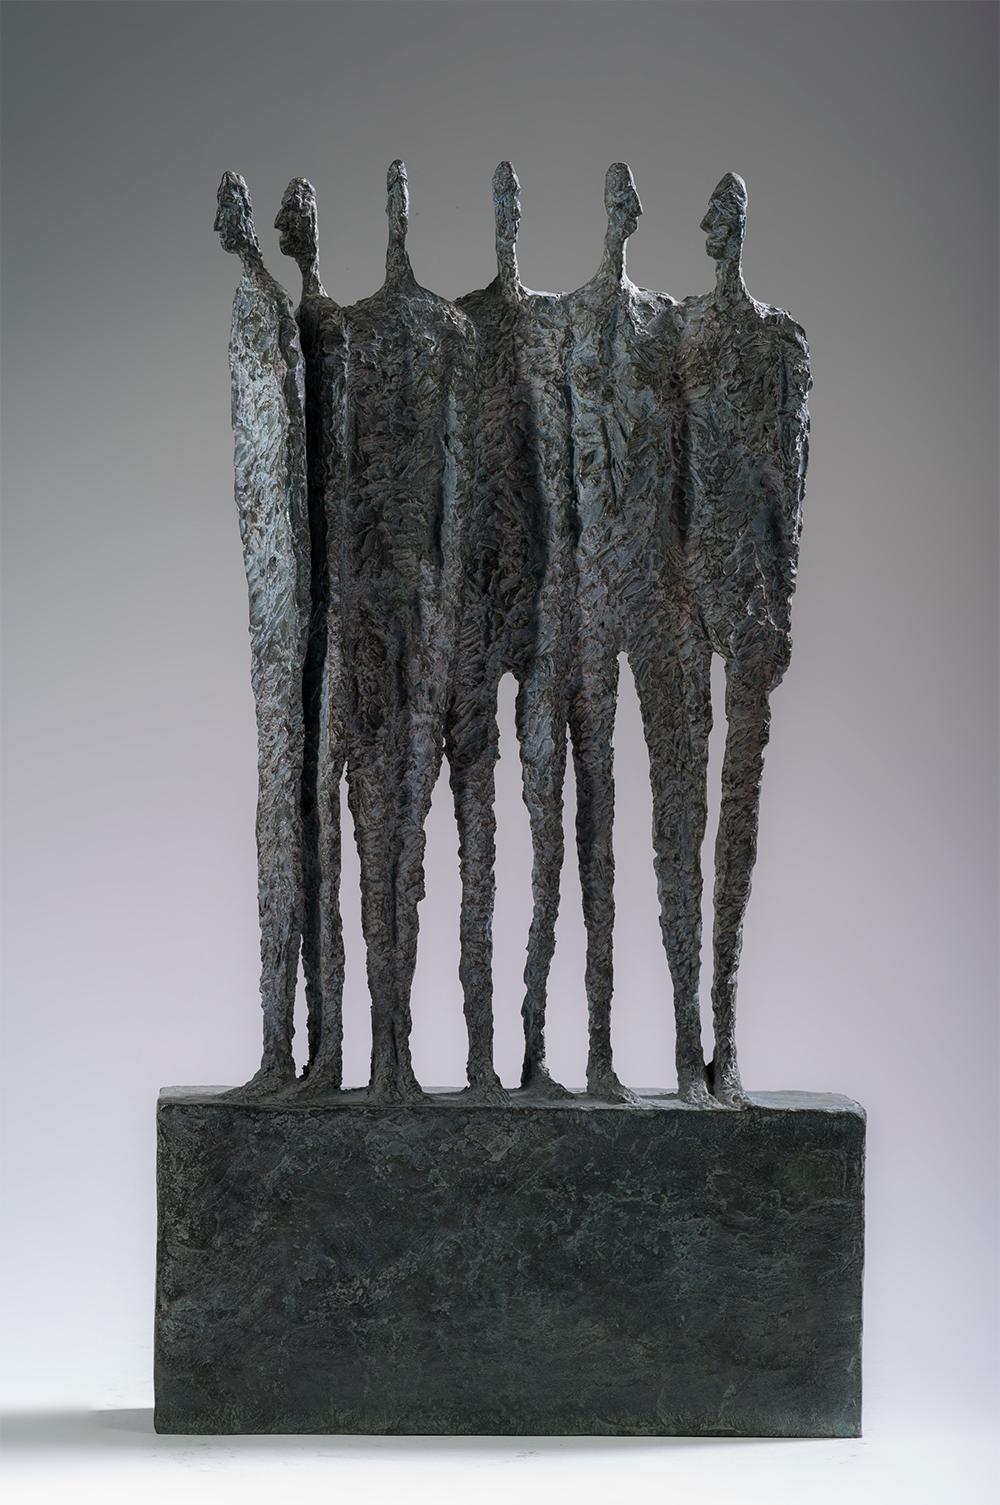 The Group by Martine Demal - bronze sculpture, group of human figures